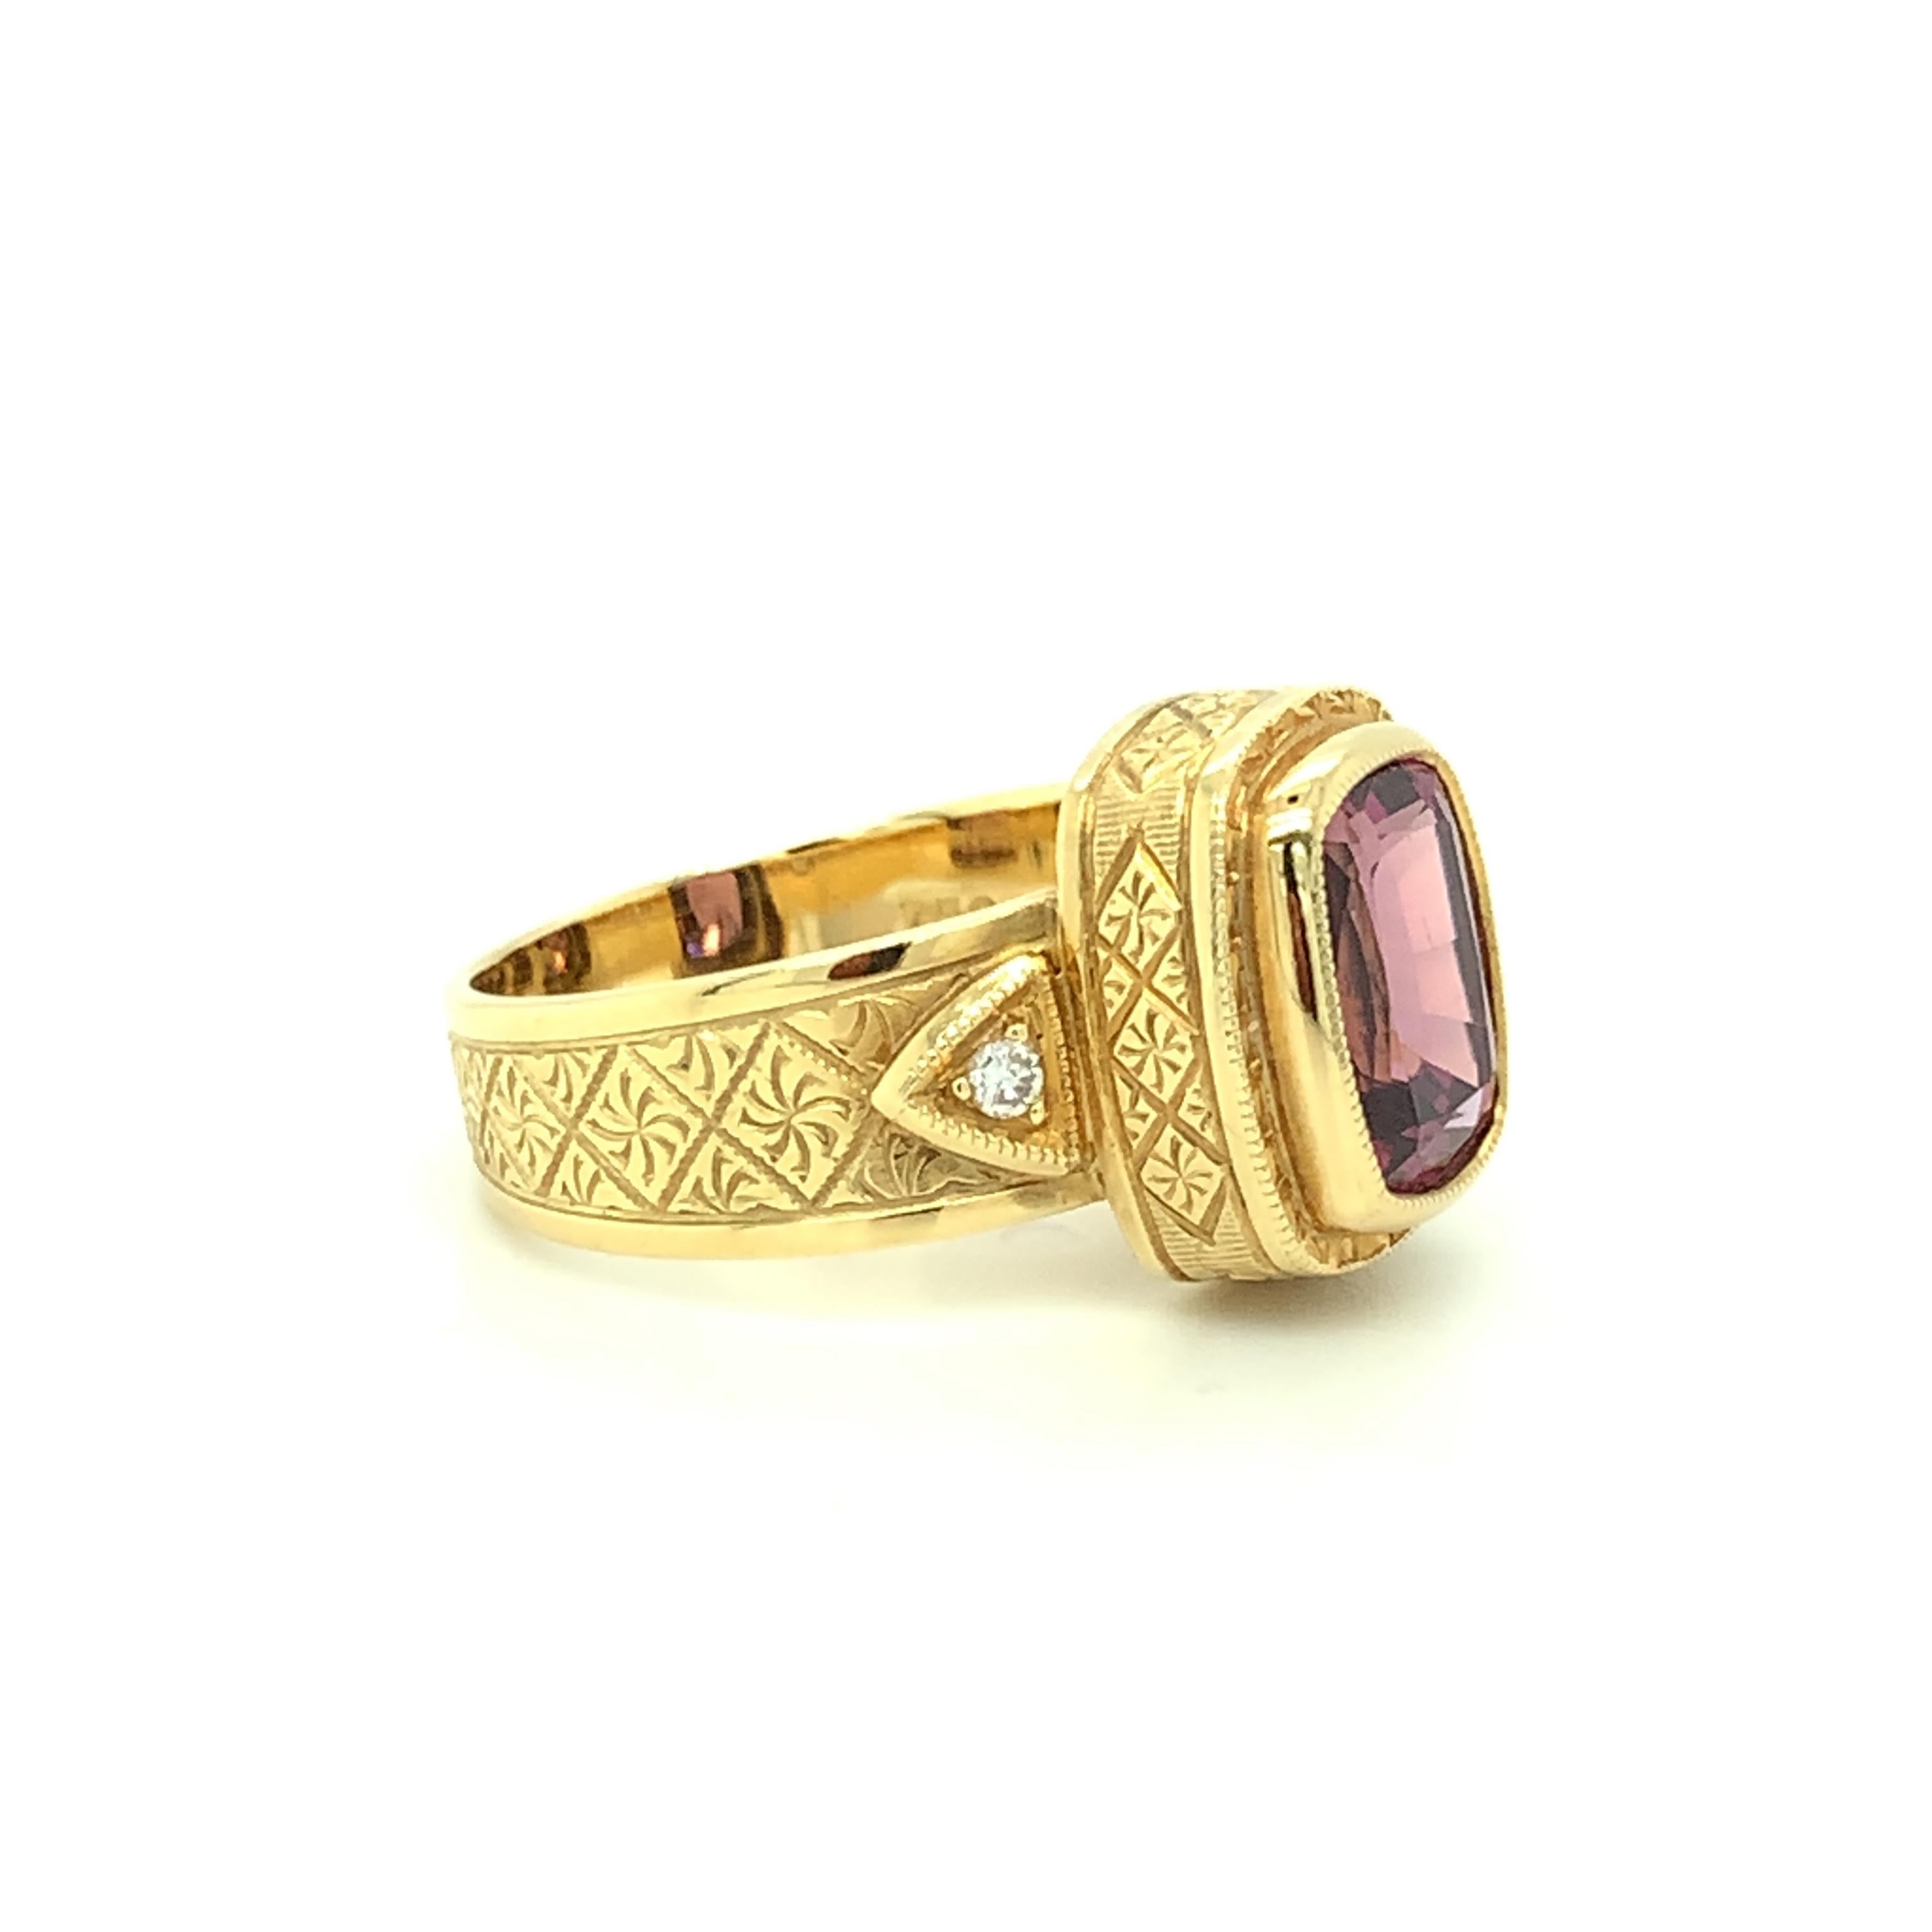 4.30 Carat Rhodolite Garnet and Diamond Band Ring in 18k Yellow Gold   For Sale 2